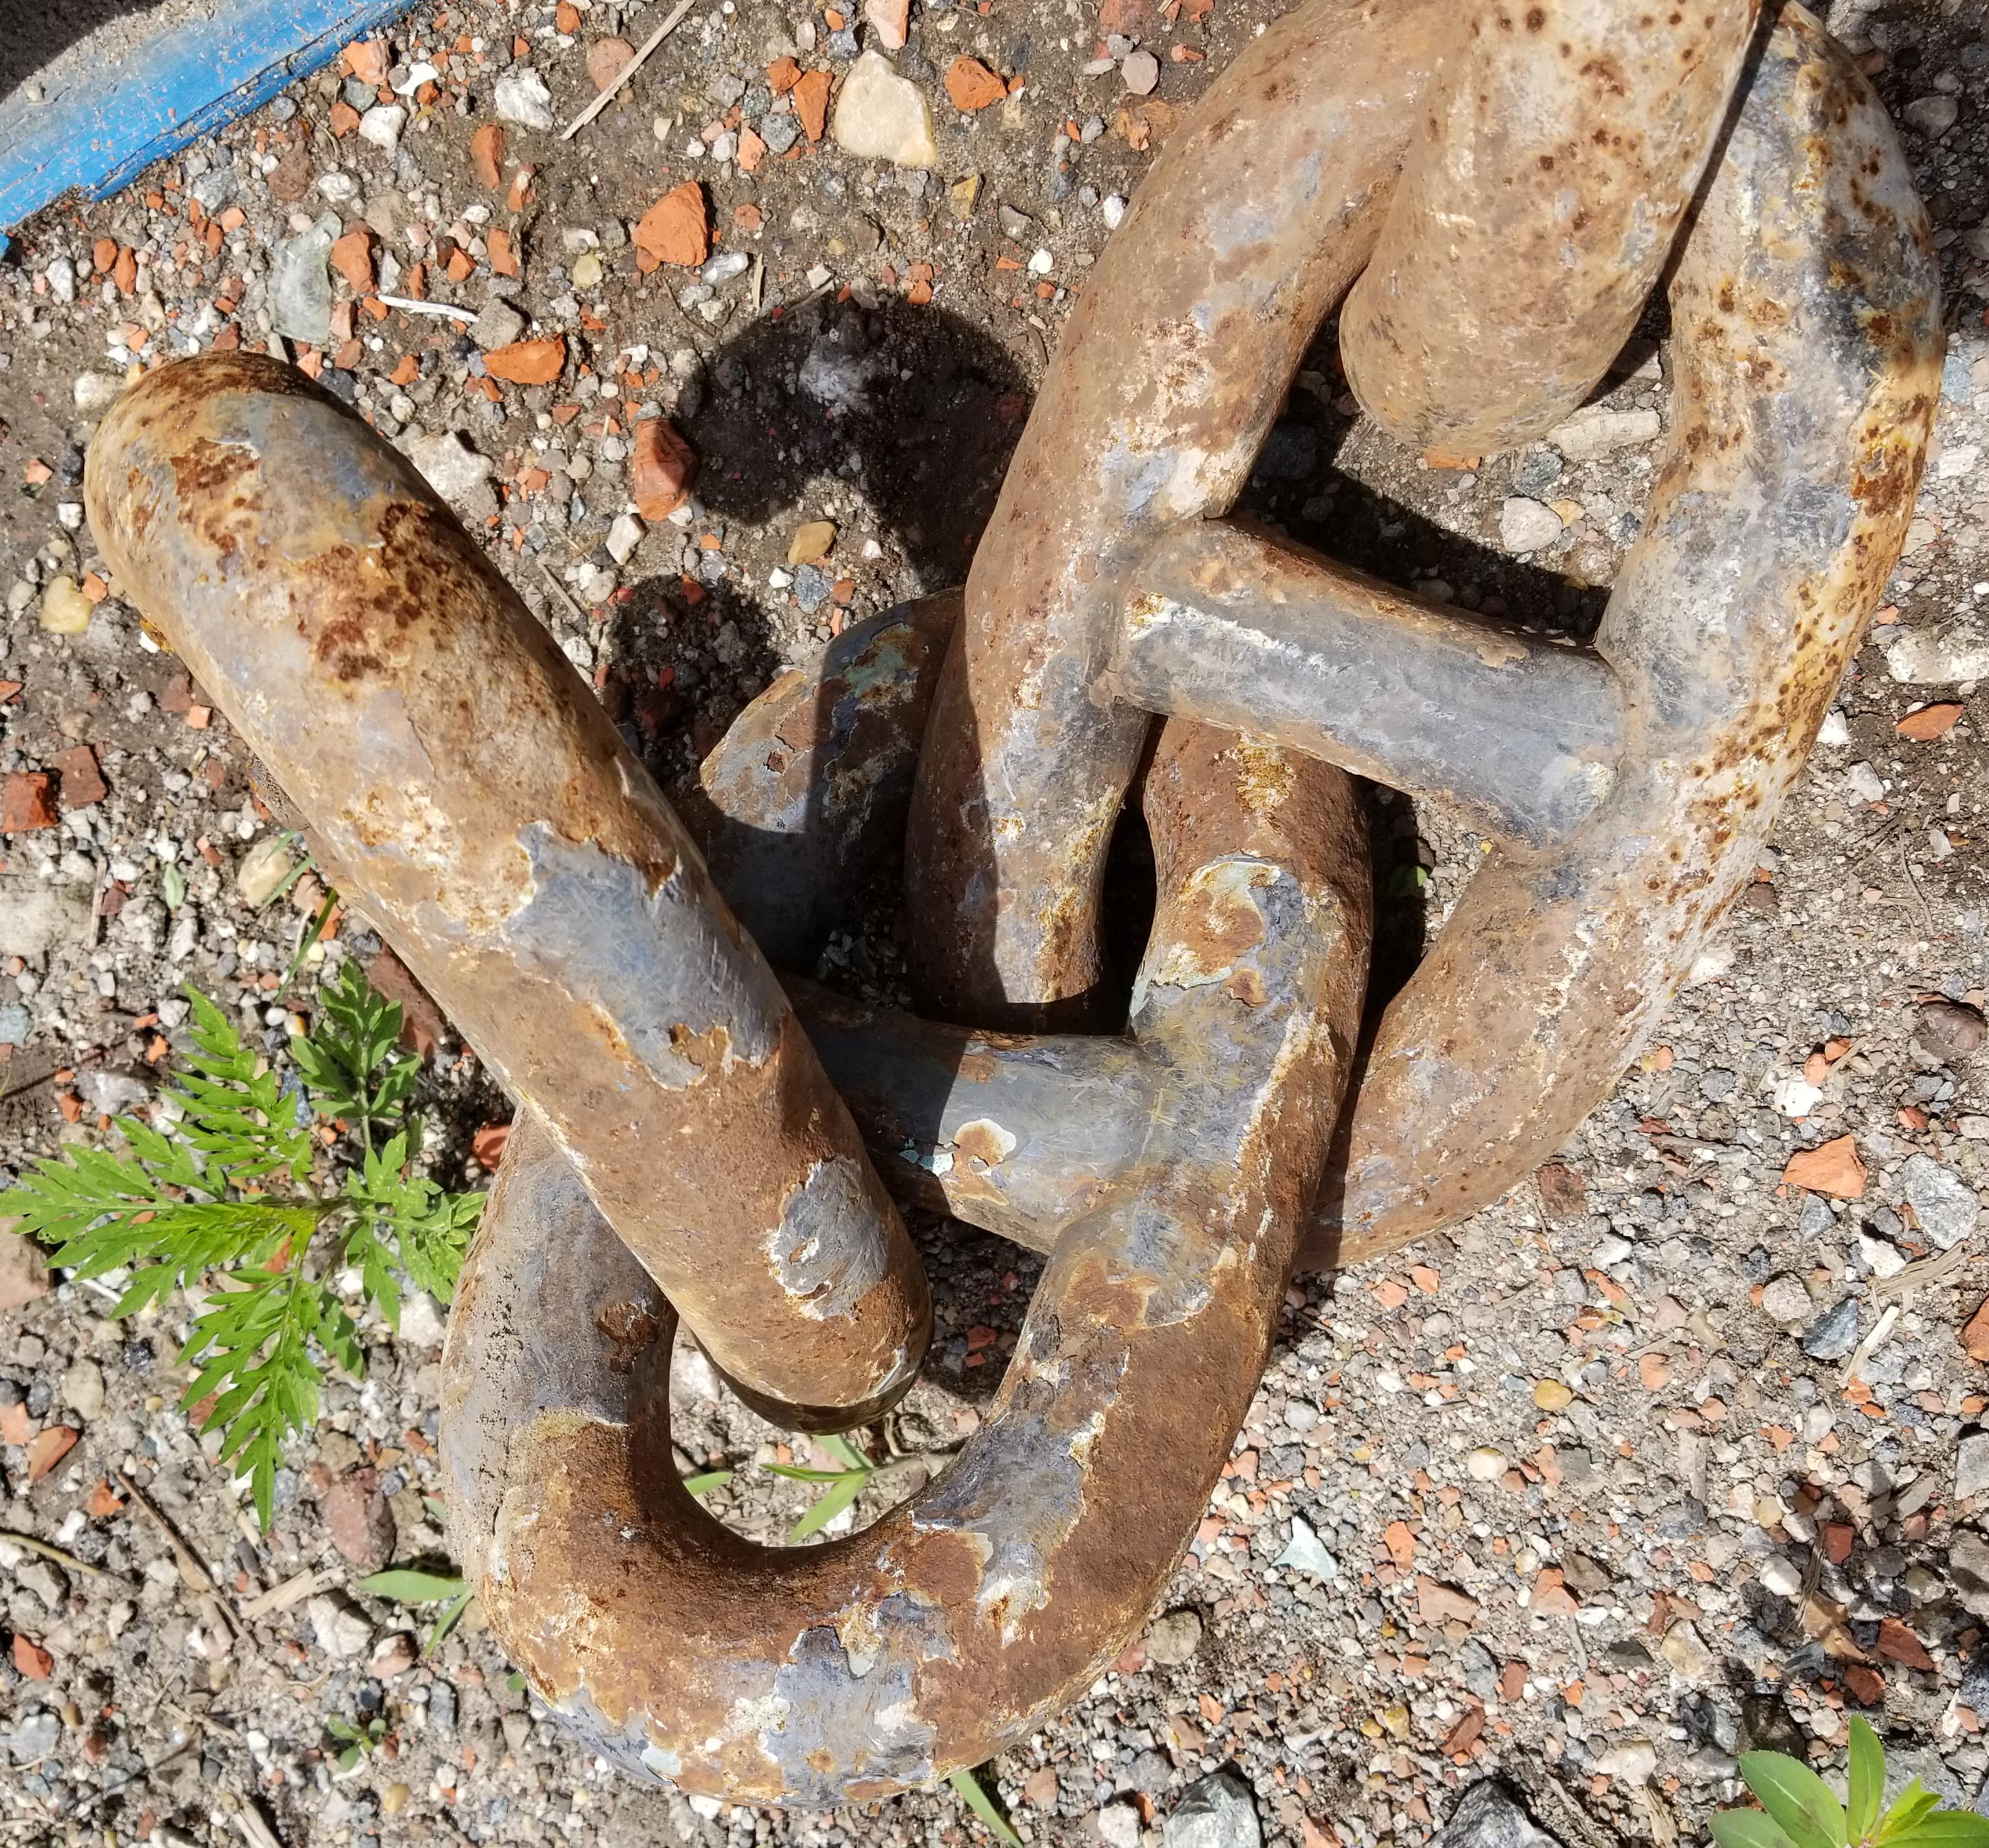 Identifying wrought chain? - Blacksmithing, General Discussion - I Forge  Iron